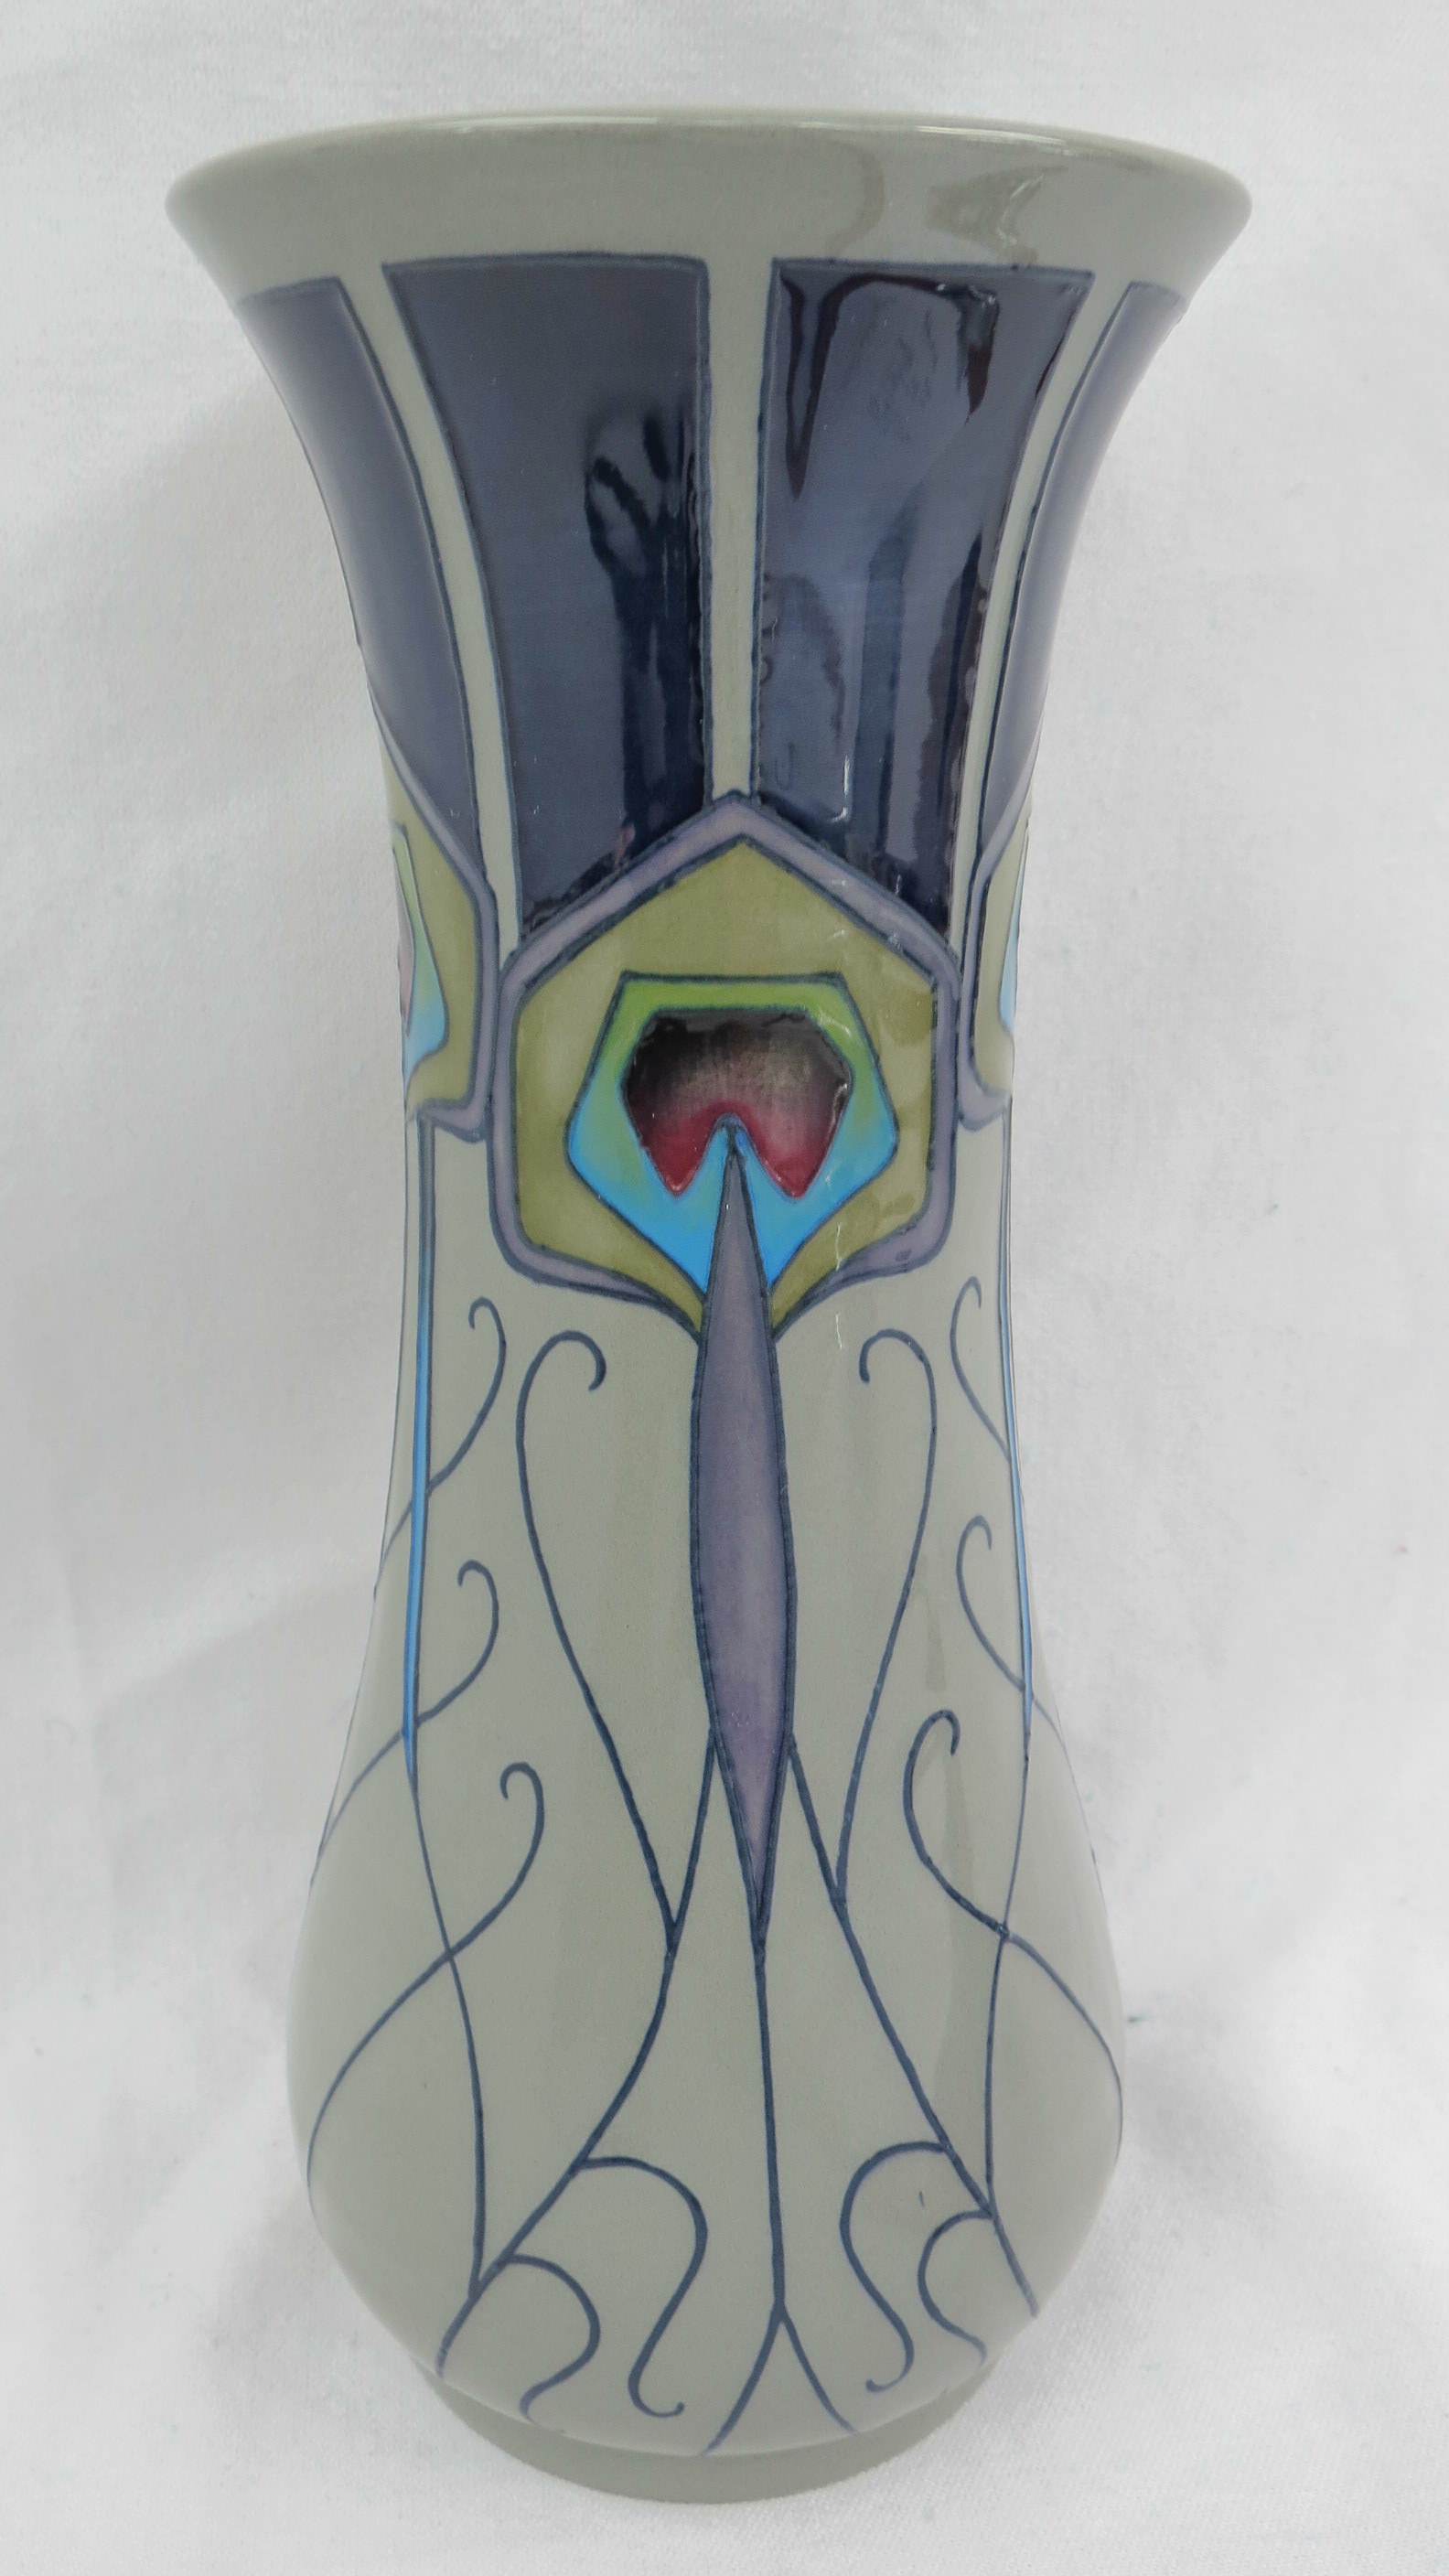 A Moorcroft baluster shaped vase, decorated with a stylised peacock feather design on a green/grey